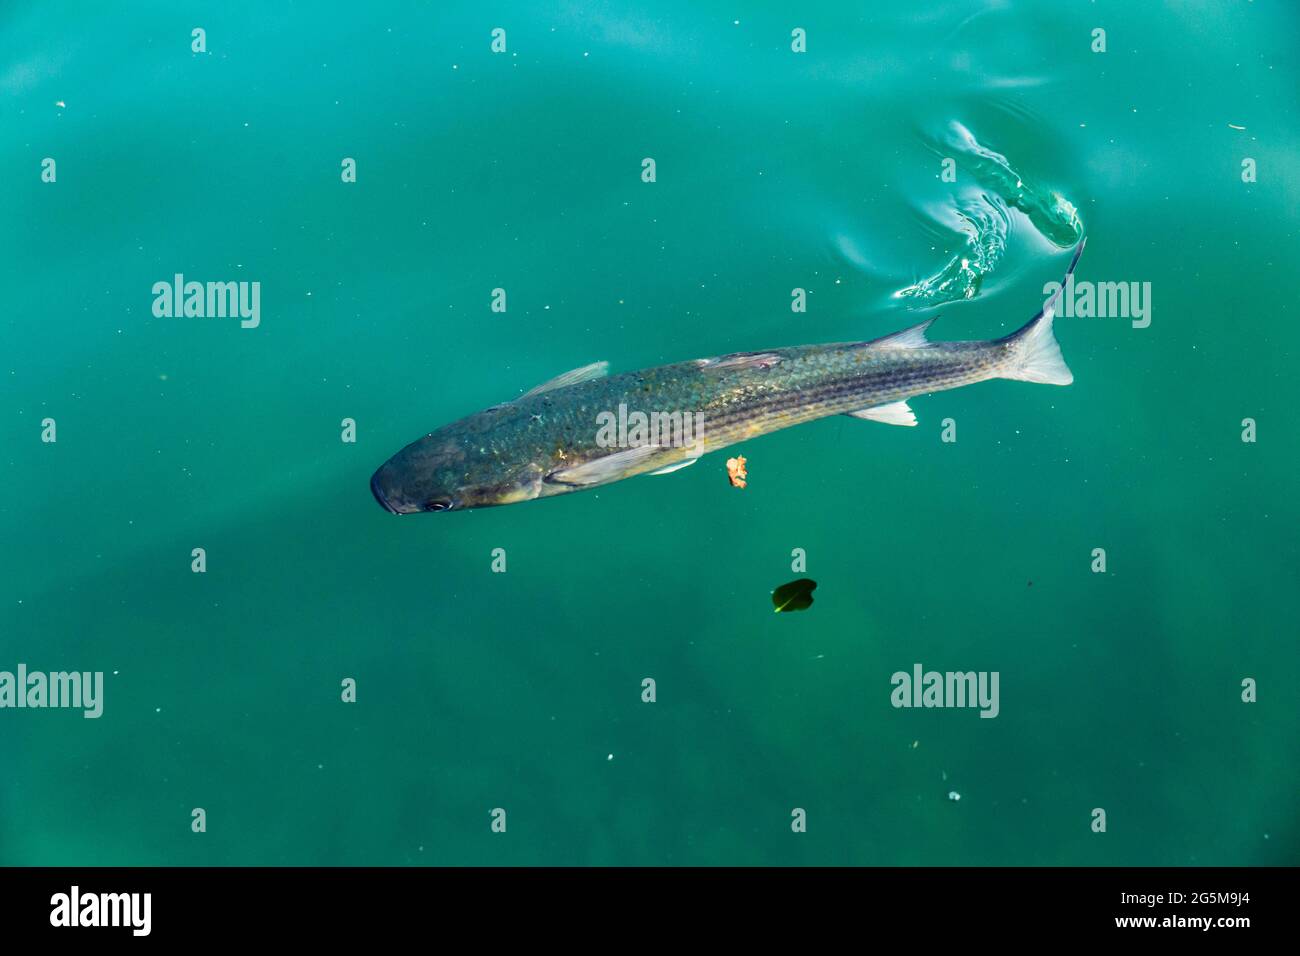 Single flathead mullet fish swimming in murky water with tail leaving trails on surface. Stock Photo